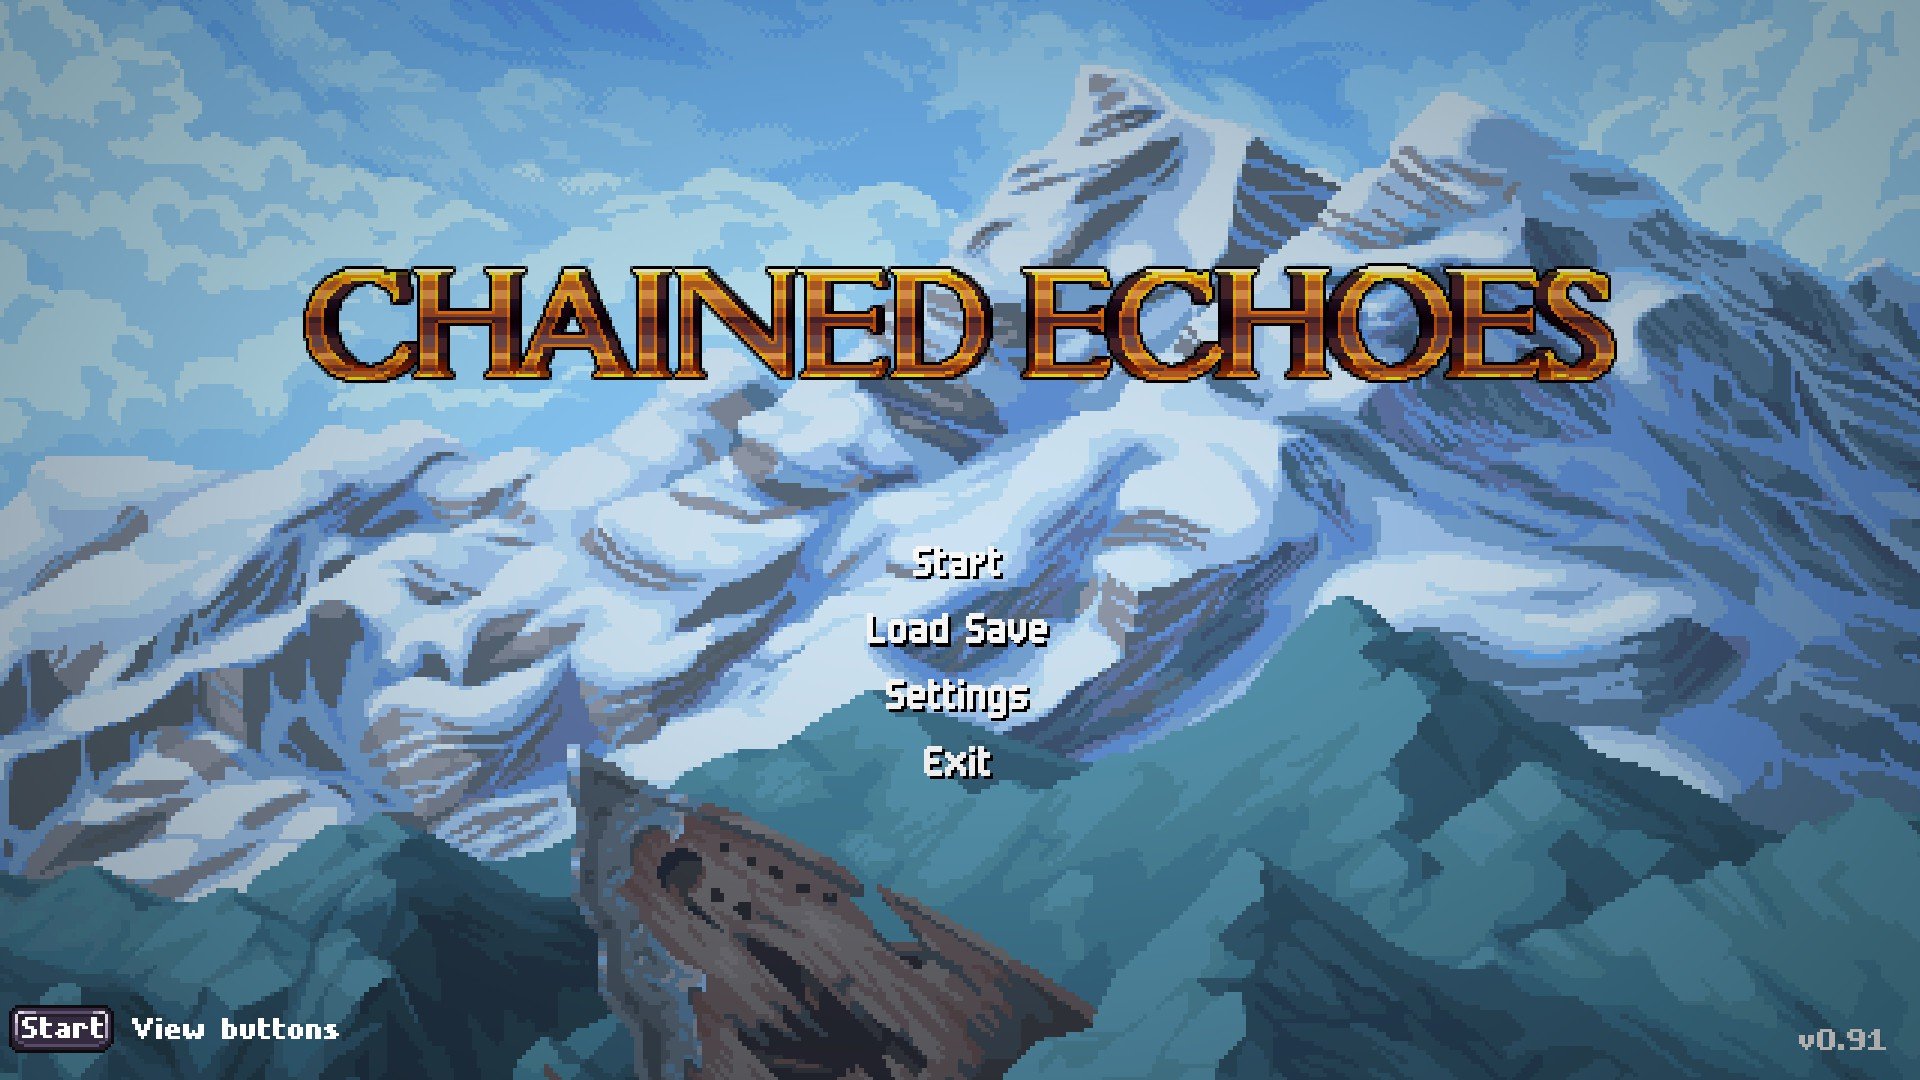 Chained Echoes Now Available On PS4, PS5, Xbox One, Series X